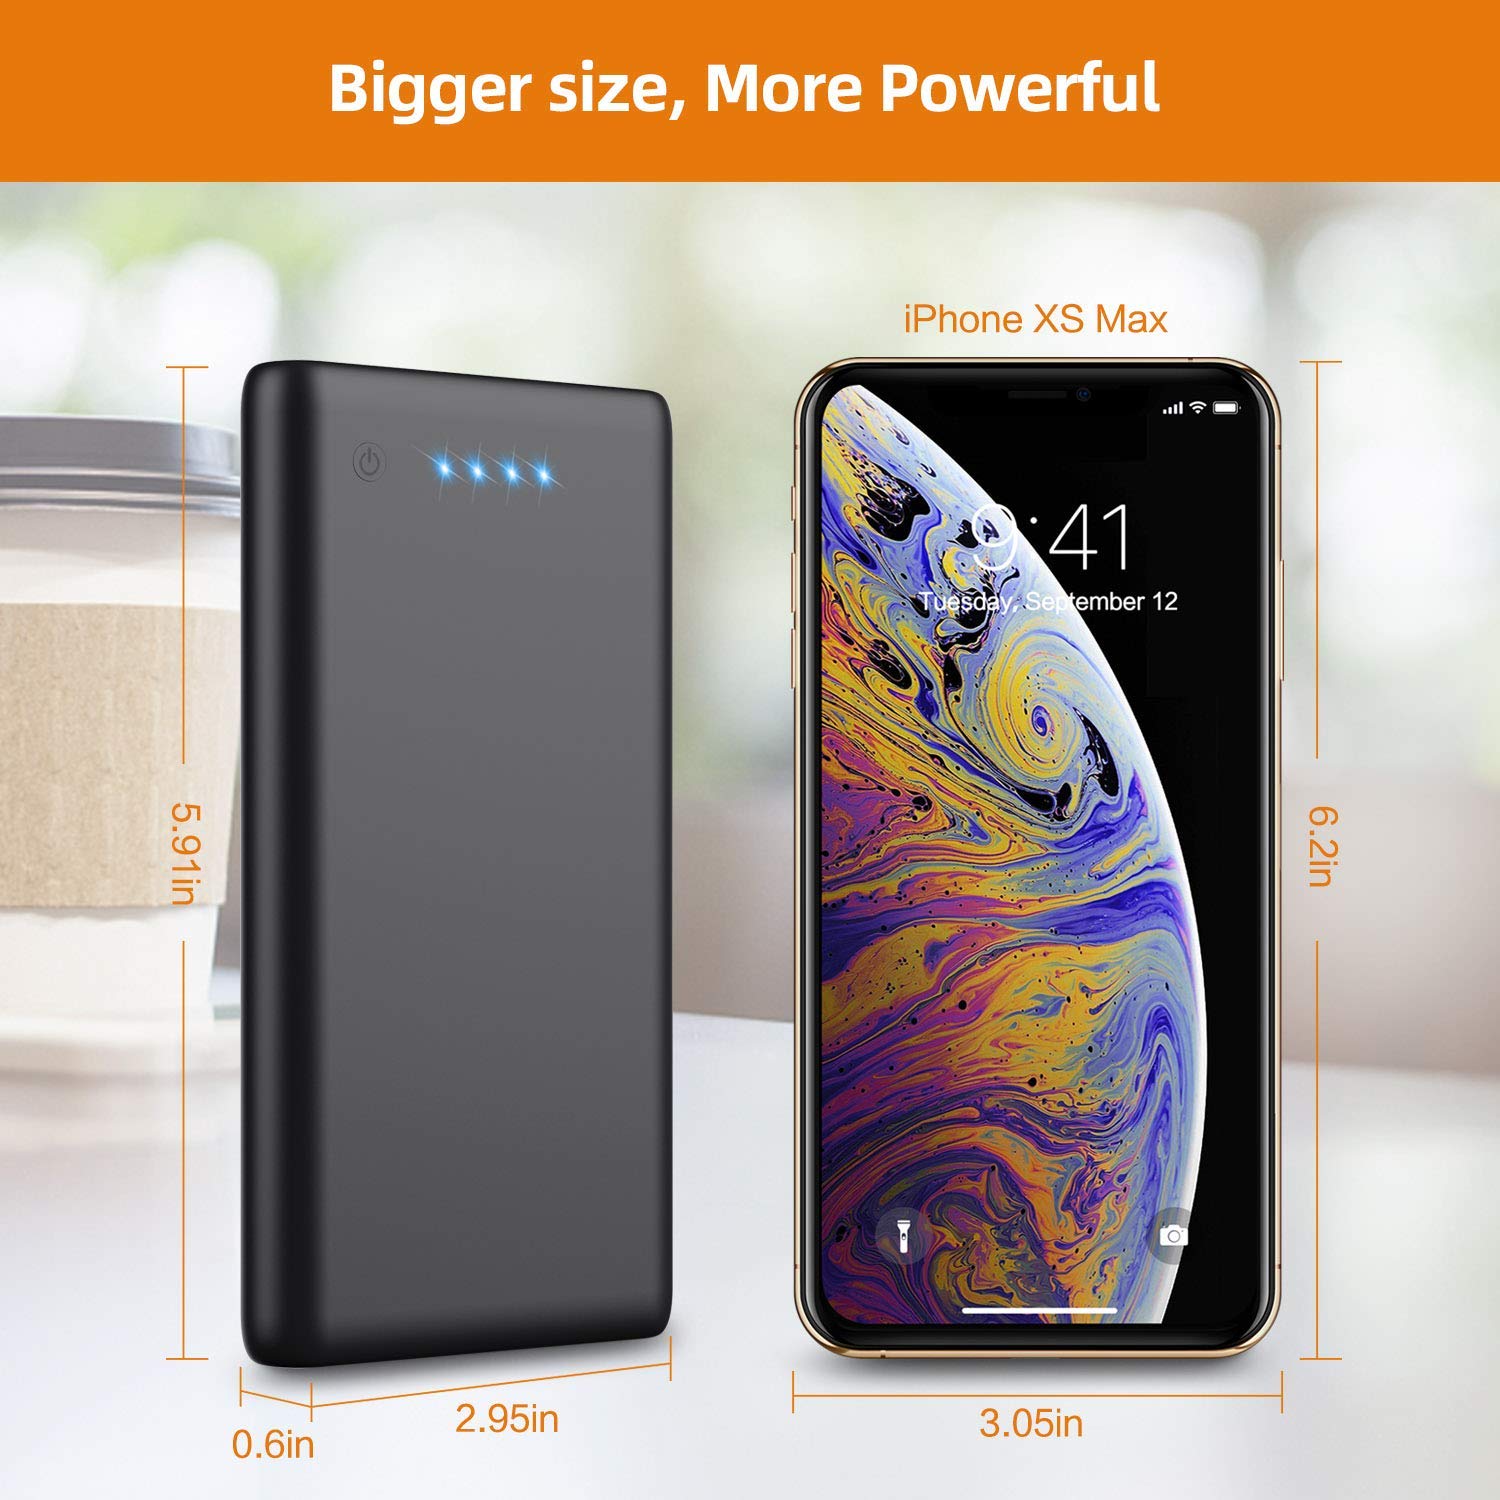 Portable Charger Power Bank 25800mAh Huge Capacity External Battery Pack Dual Output Port with LED Status Indicator Power Bank for iPhone, Samsung etc